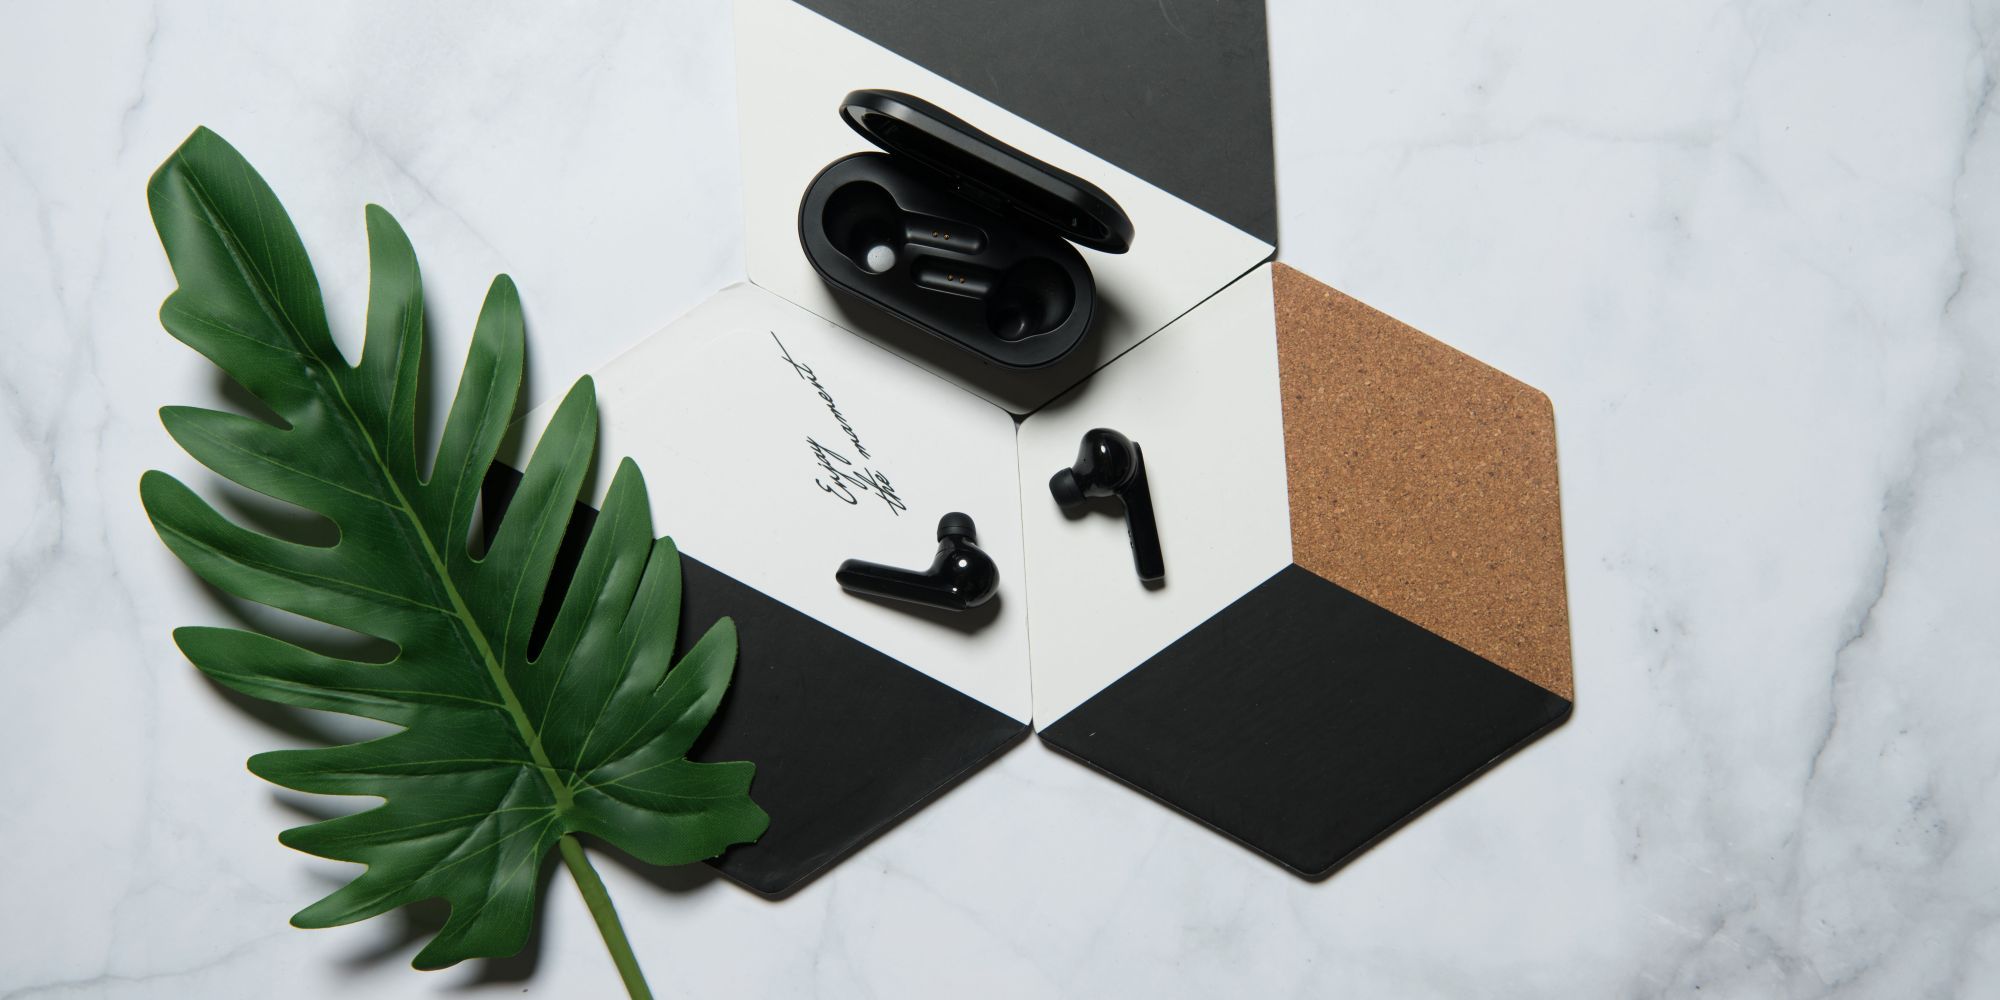 Mobvoi Earbuds Gesture earbuds with case on decorative tiles